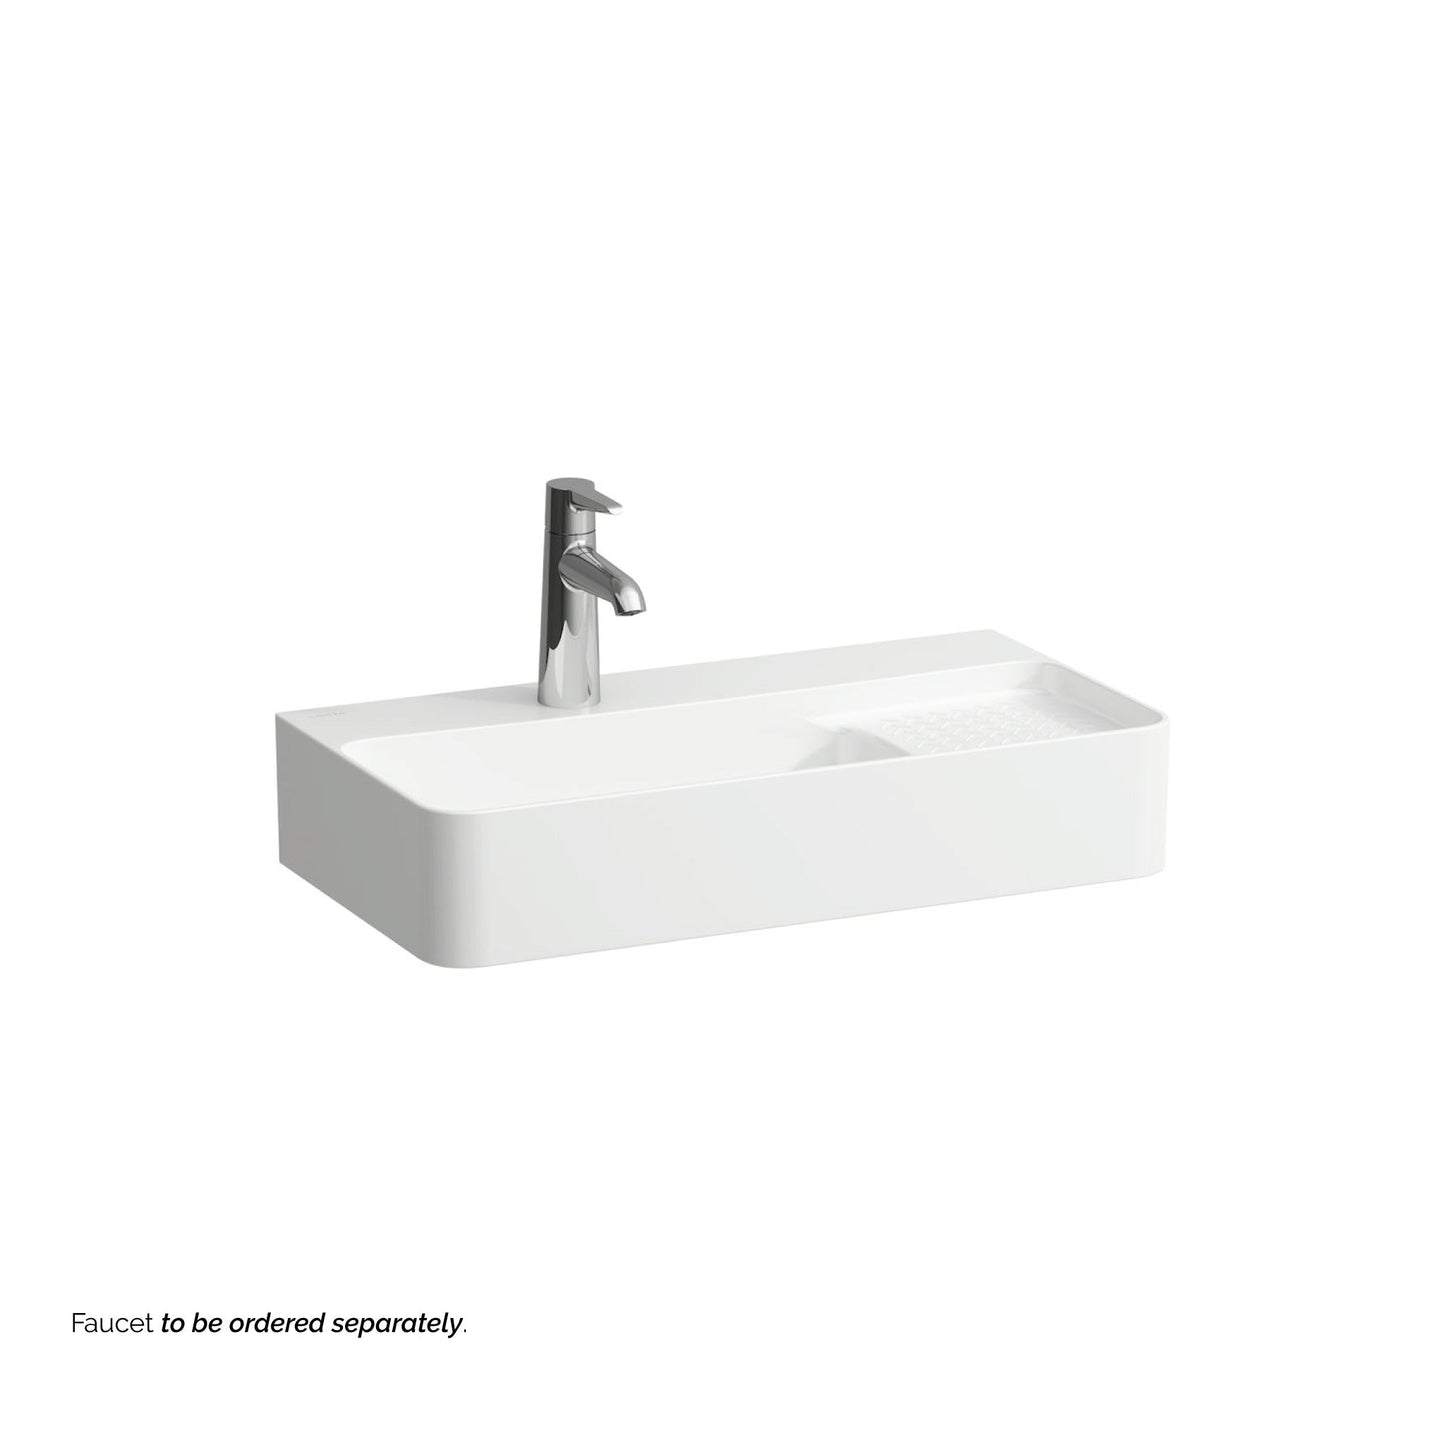 Laufen Val 24" x 12" Rectangular Matte White Wall-Mounted Bathroom Sink With Faucet Hole